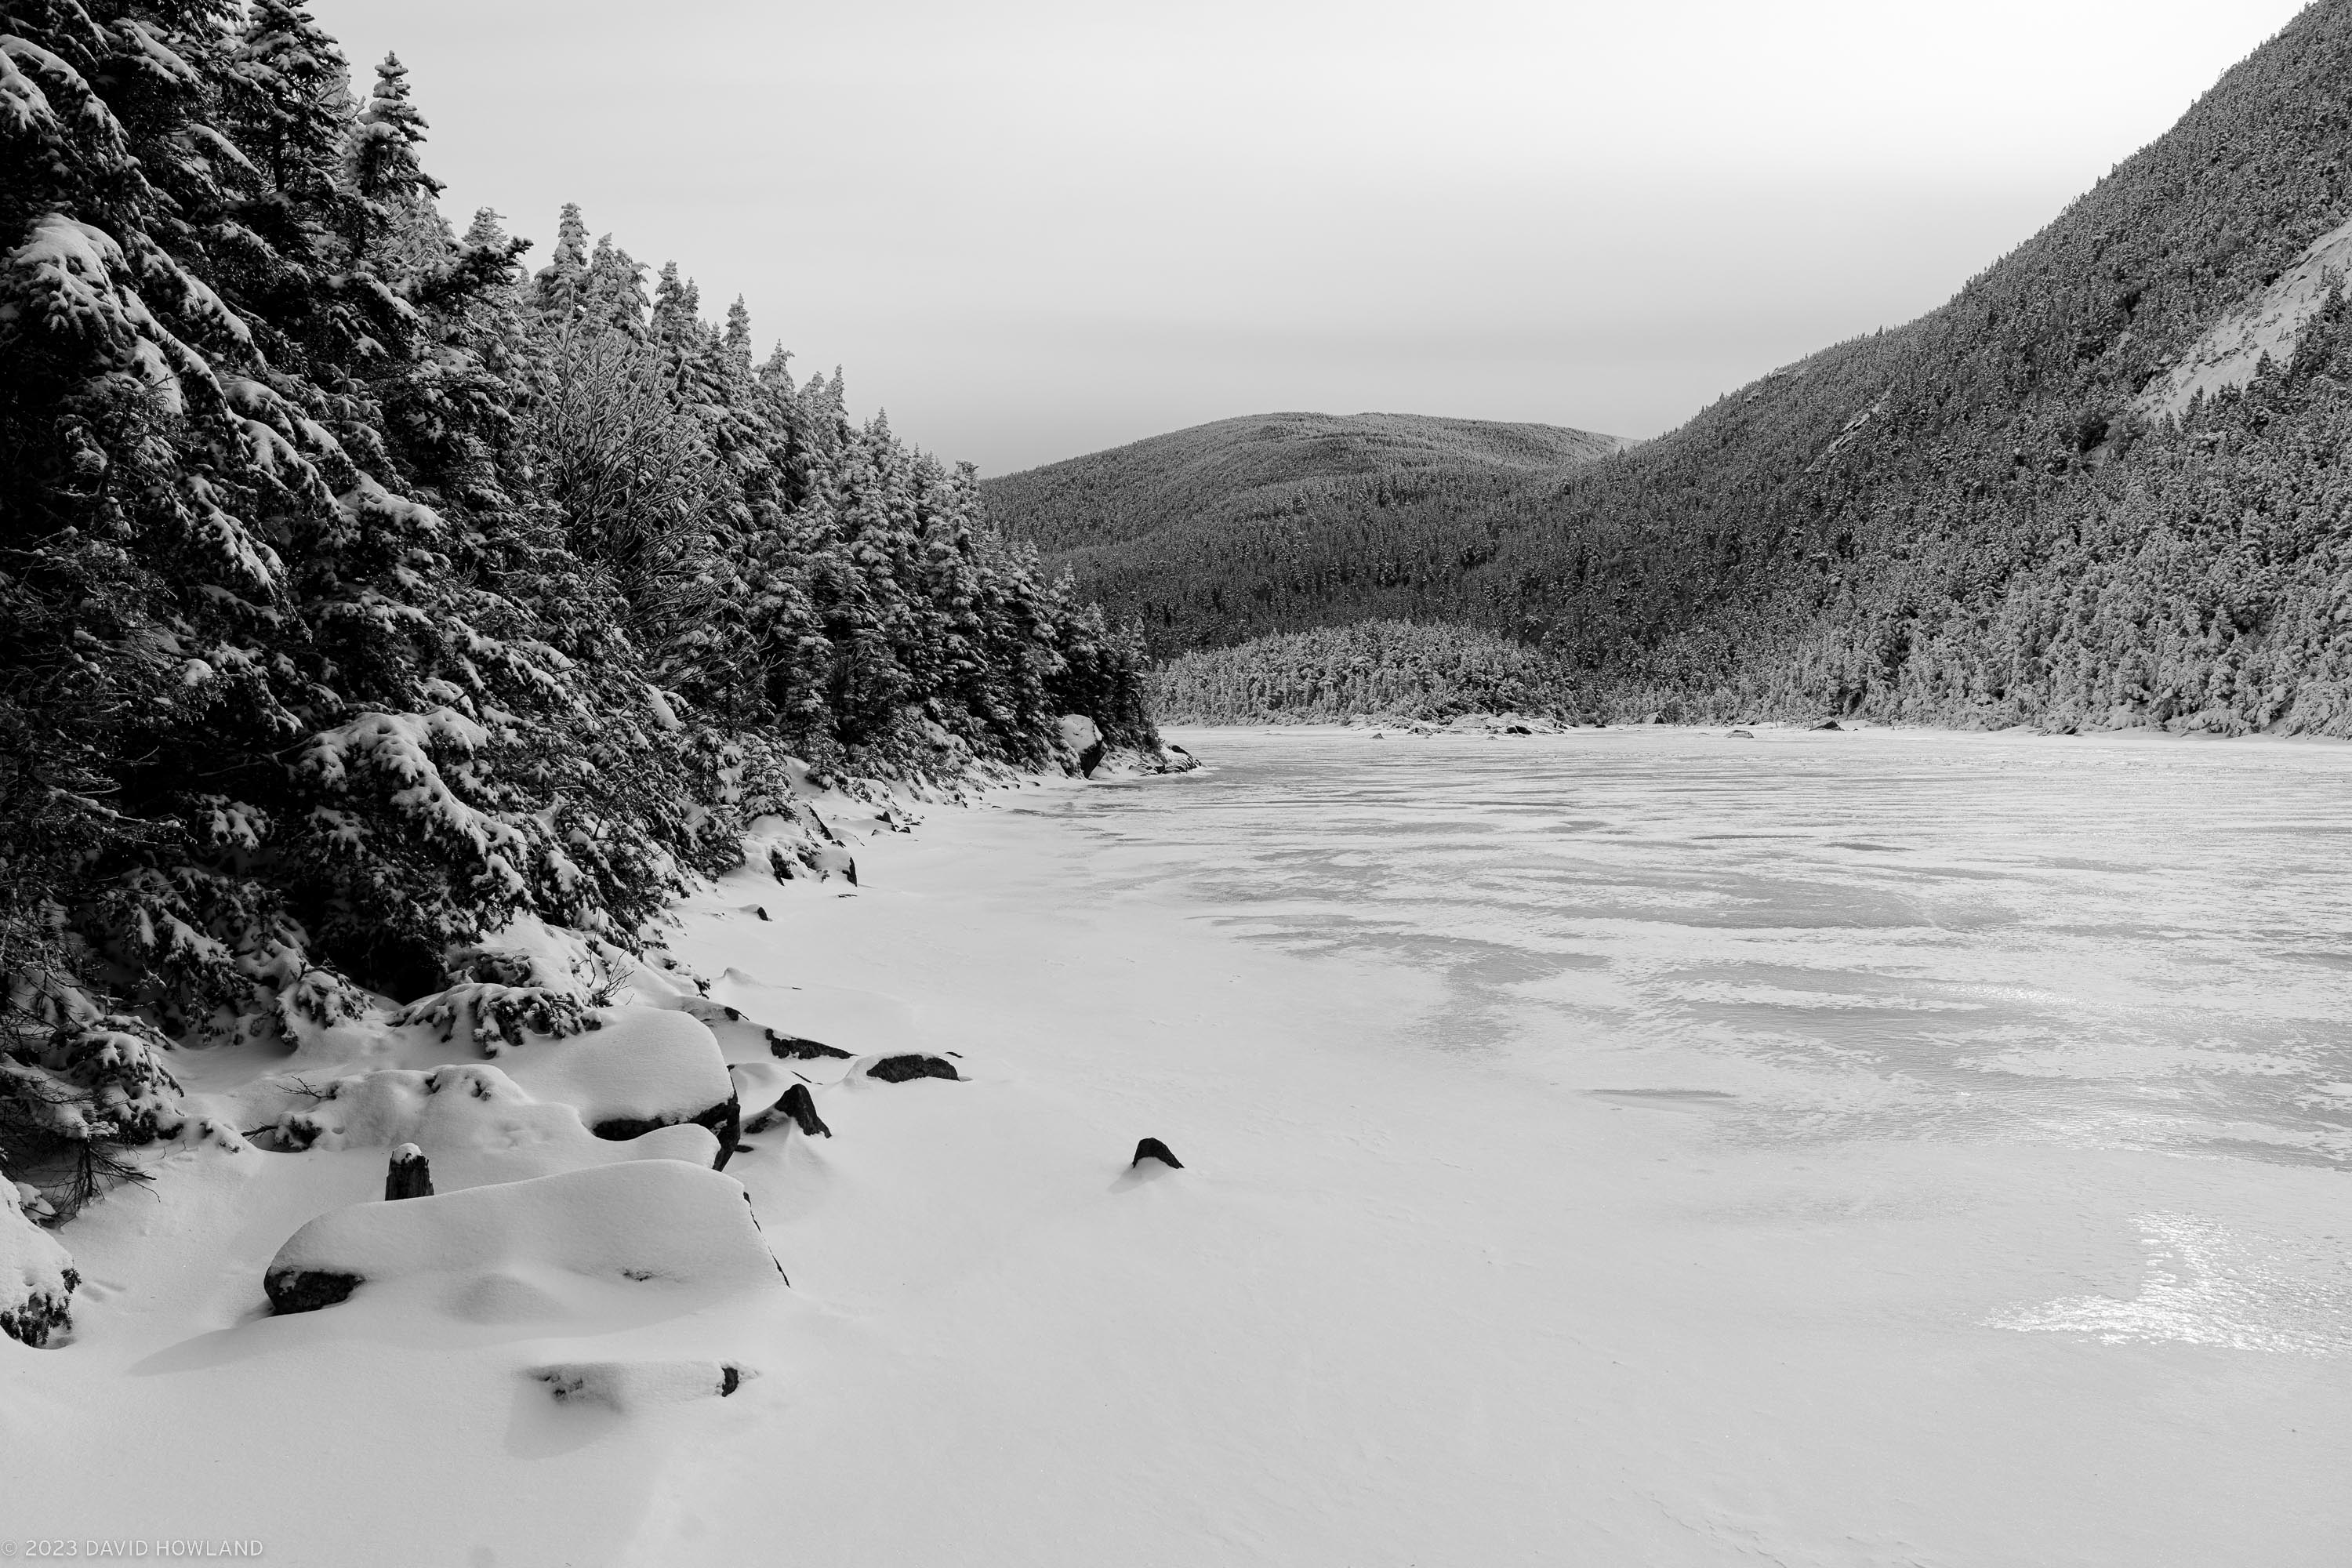 A black and white photo of snow and ice covered trees on the slopes of Mount Kinsman over the frozen surface of Kinsman Pond in New Hampshire.